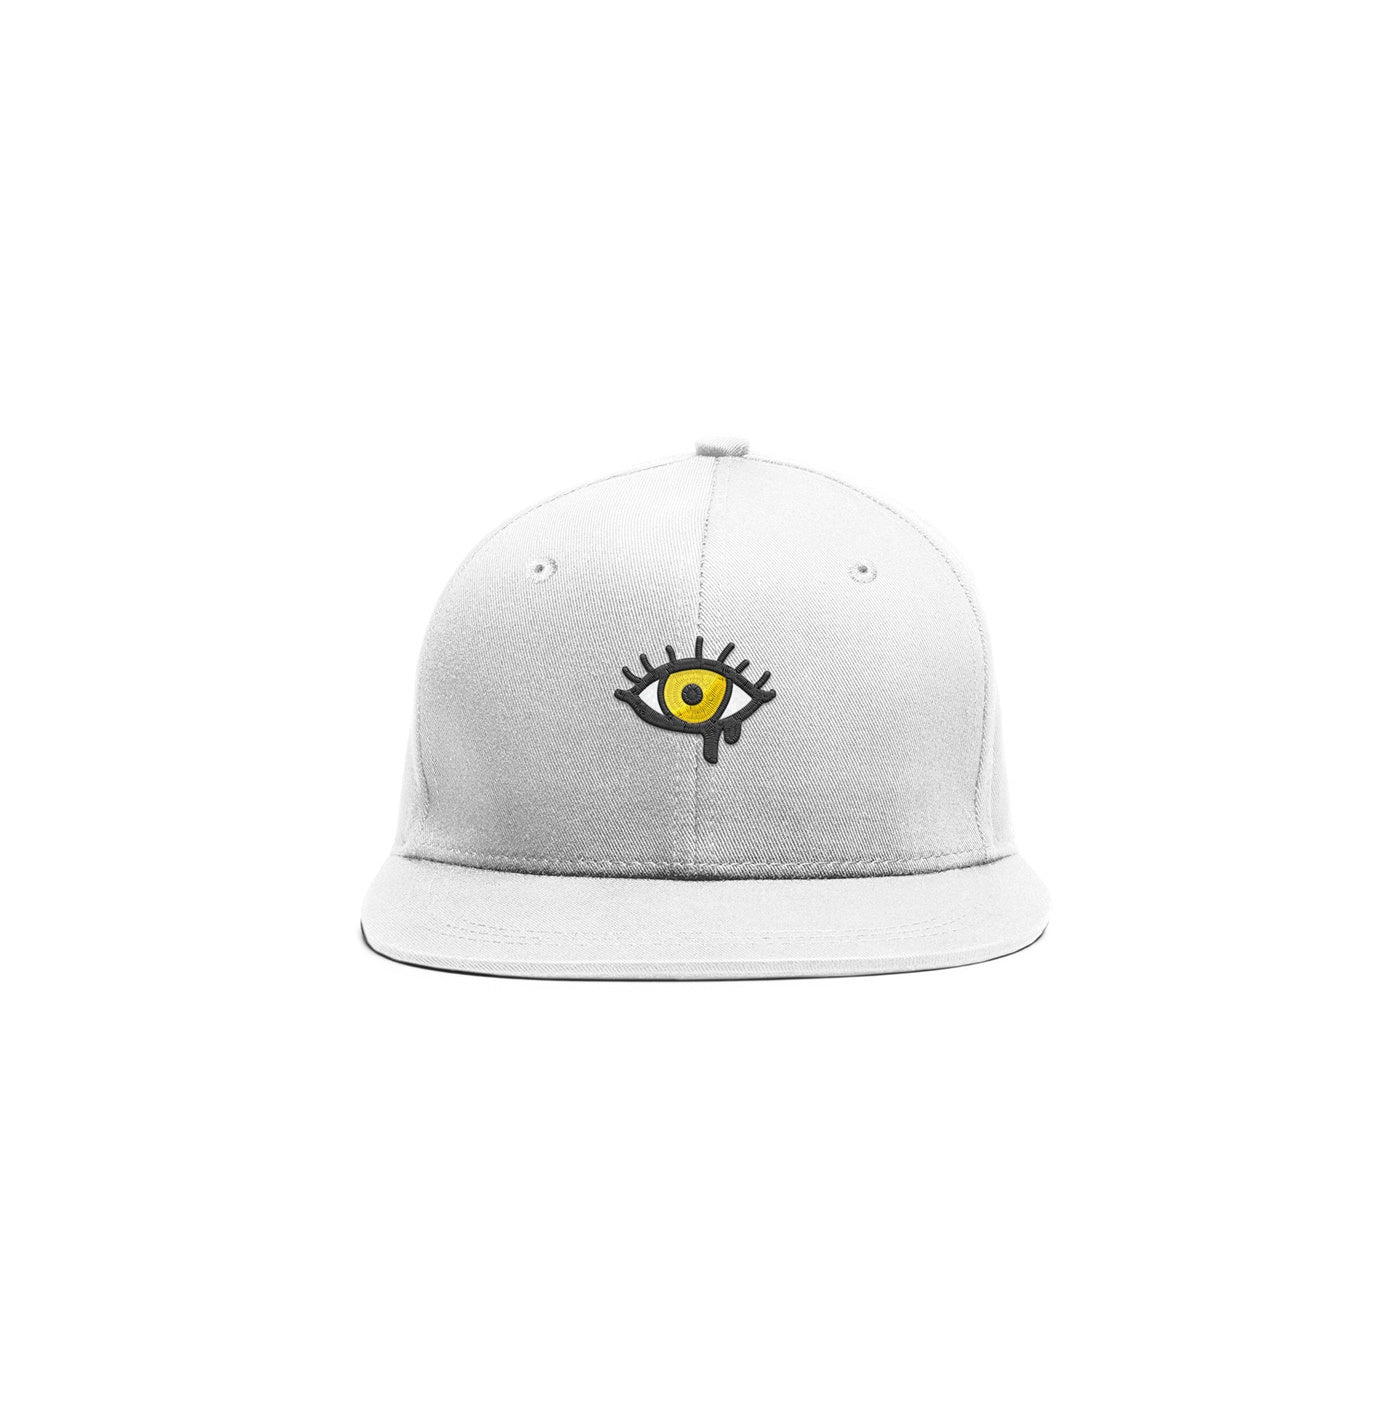 Embroidered Eye Cap